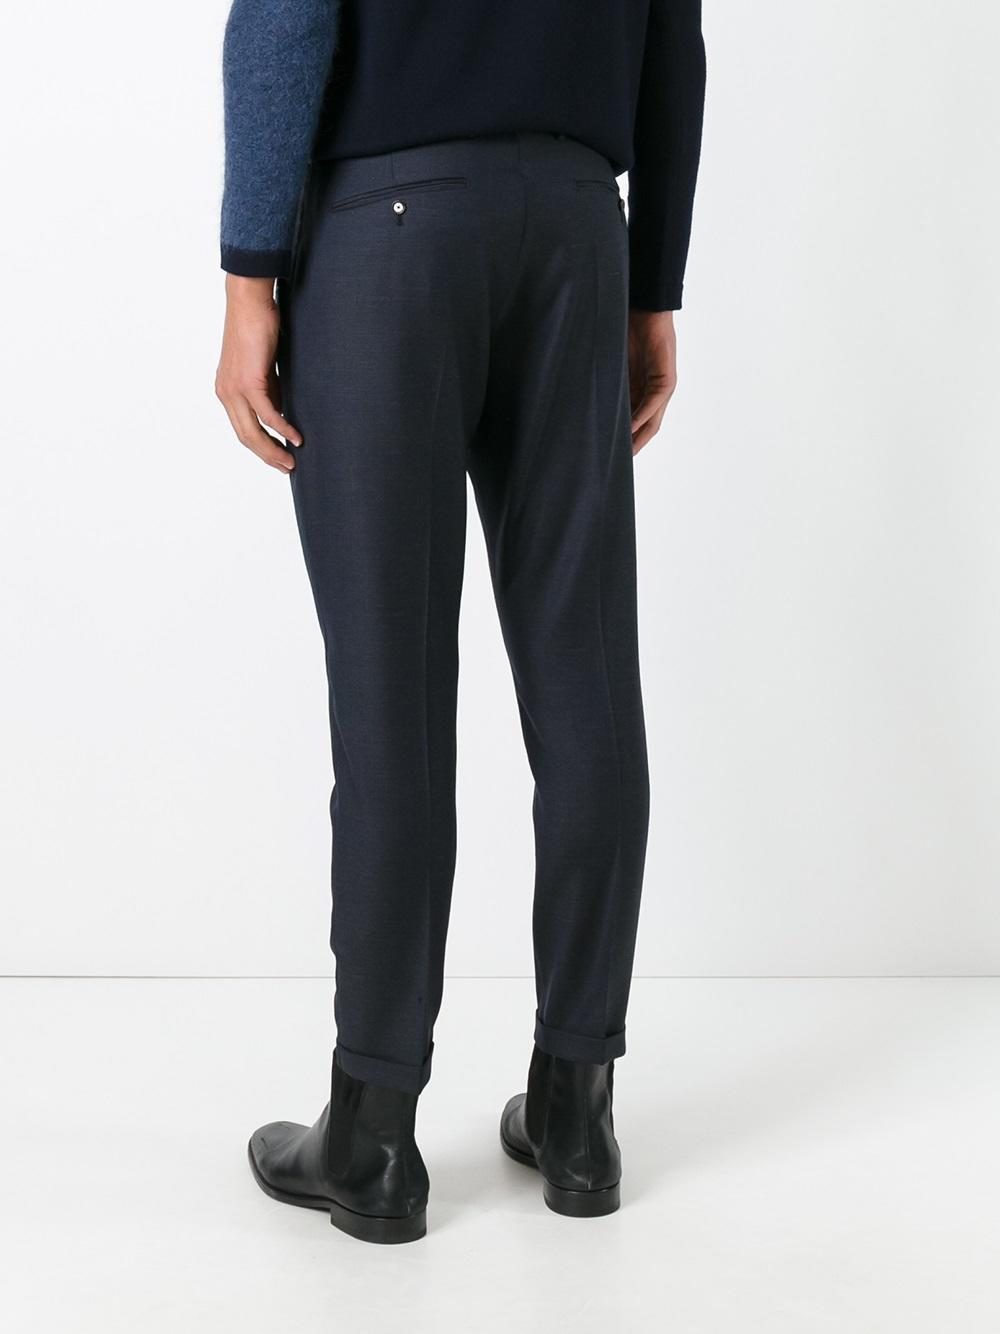 PT01 Wool 'assay' Carrot Fit Trousers in Blue for Men - Lyst